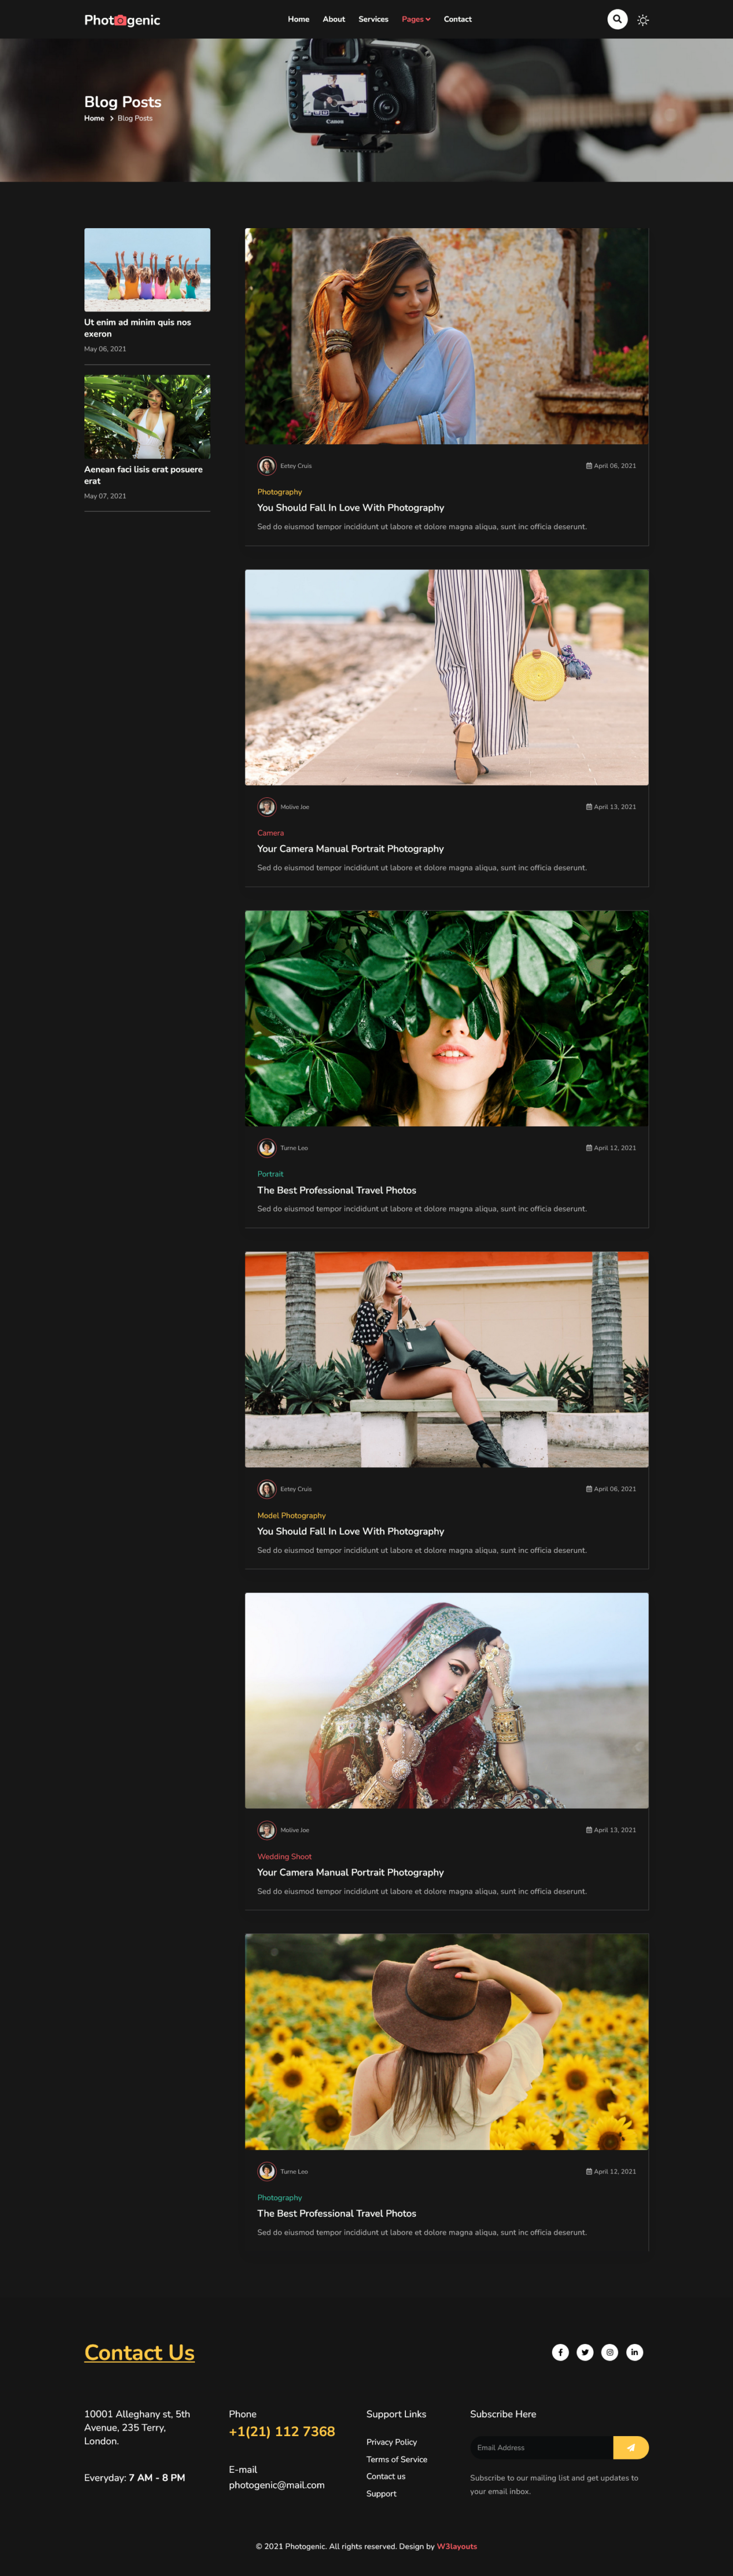 Photogenic website template - blog page